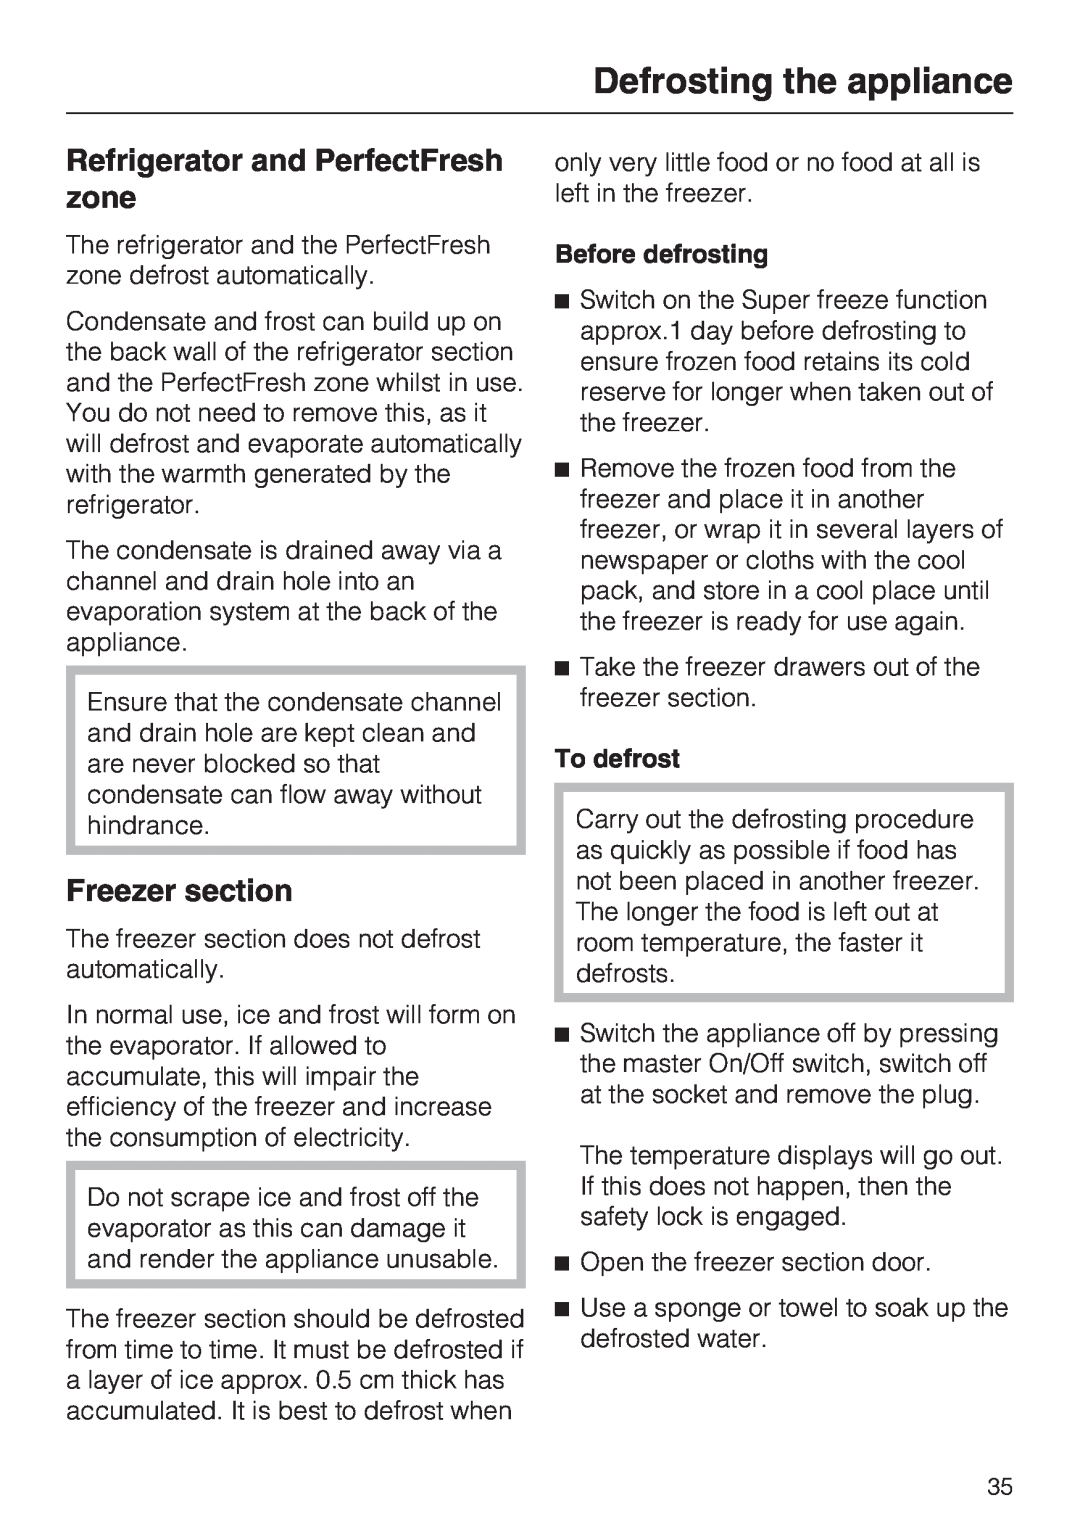 Miele KF 9757 ID installation instructions Defrosting the appliance, Refrigerator and PerfectFresh zone, Freezer section 